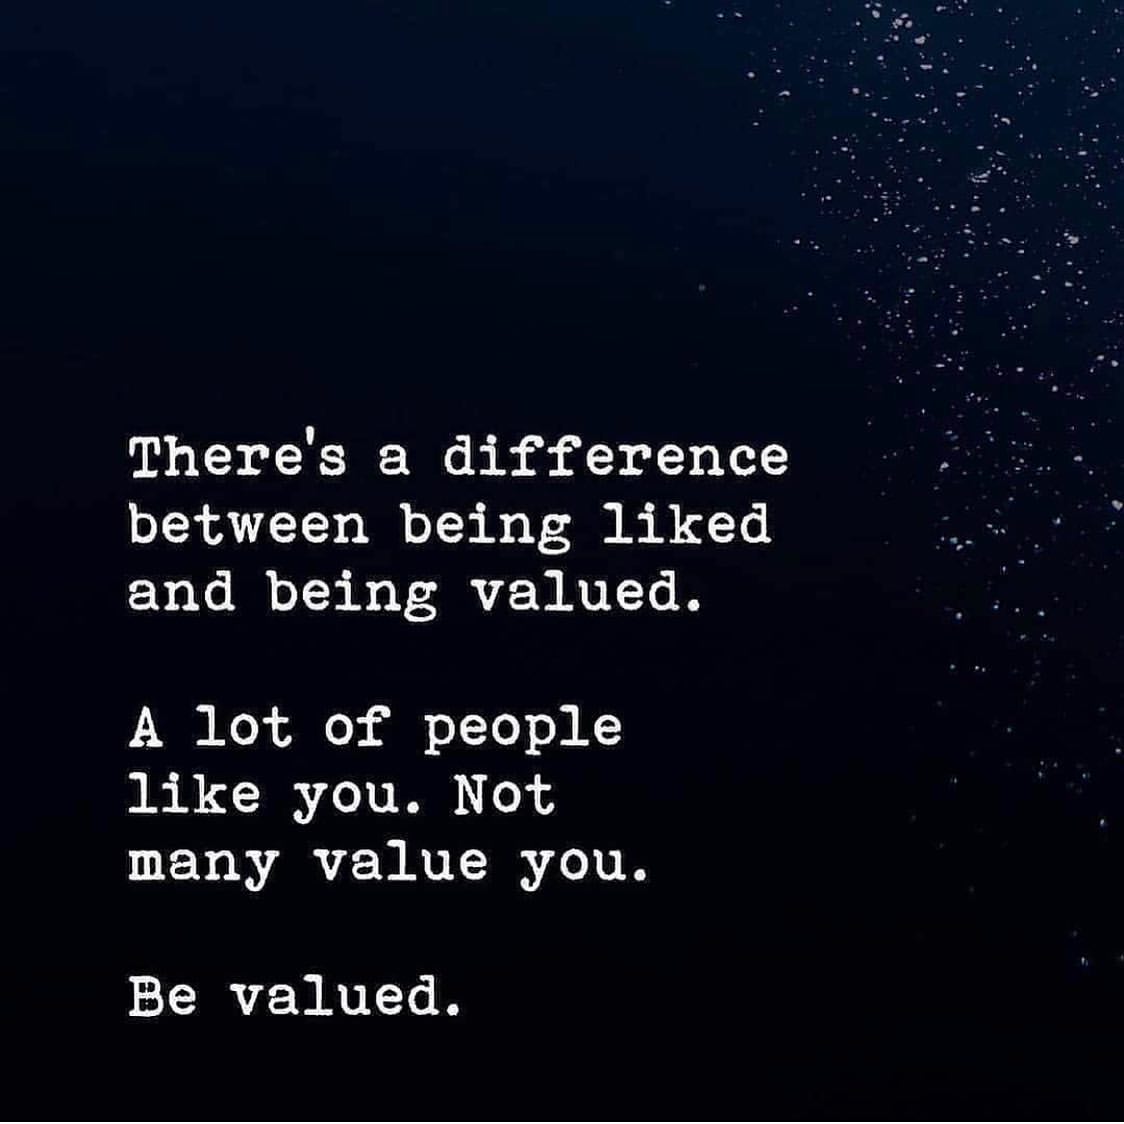 There's a difference between being liked and being valued. A lot of people like you. Not many value you. Be valued.